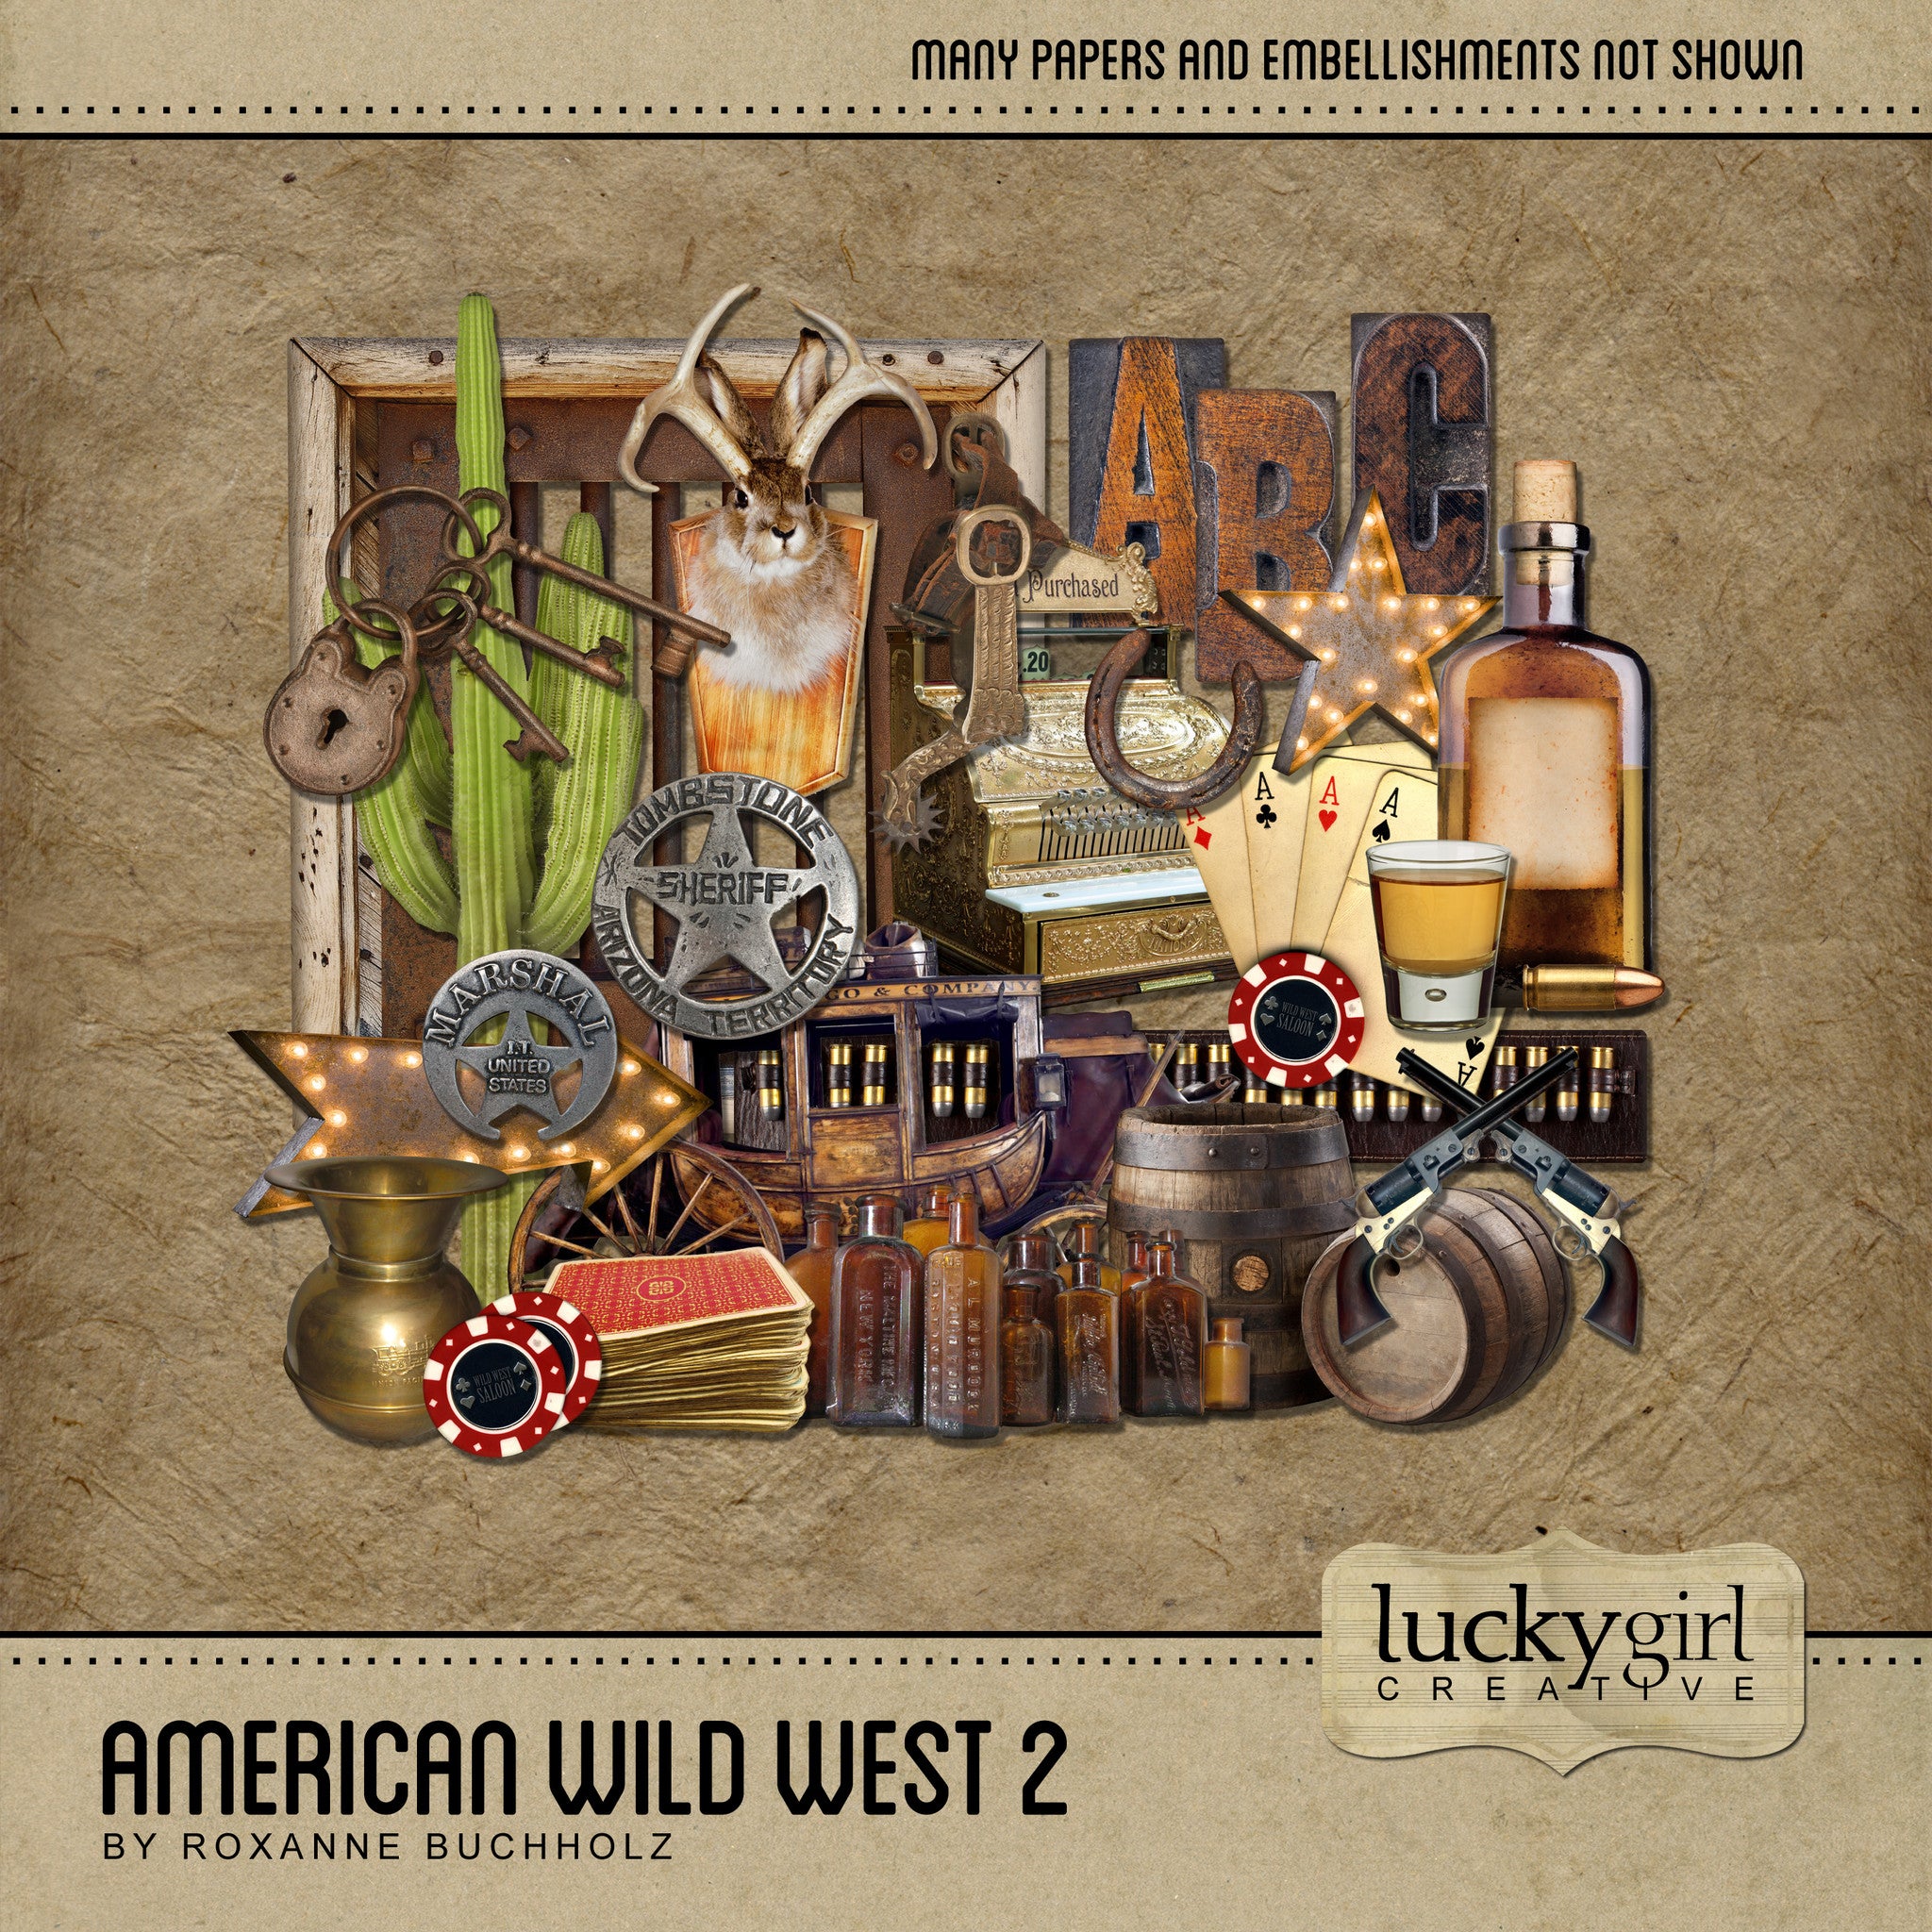 The antique color palette of the American Wild West 2 Digital Scrapbook Kit by Lucky Girl Creative features western-themed art focusing on the Wild, Wild West - life in saloons, on the trail, and behind bars. Included are many western elements such as cowboy boots and spurs, and whiskey glass, cactus plus an adorable jackalope.